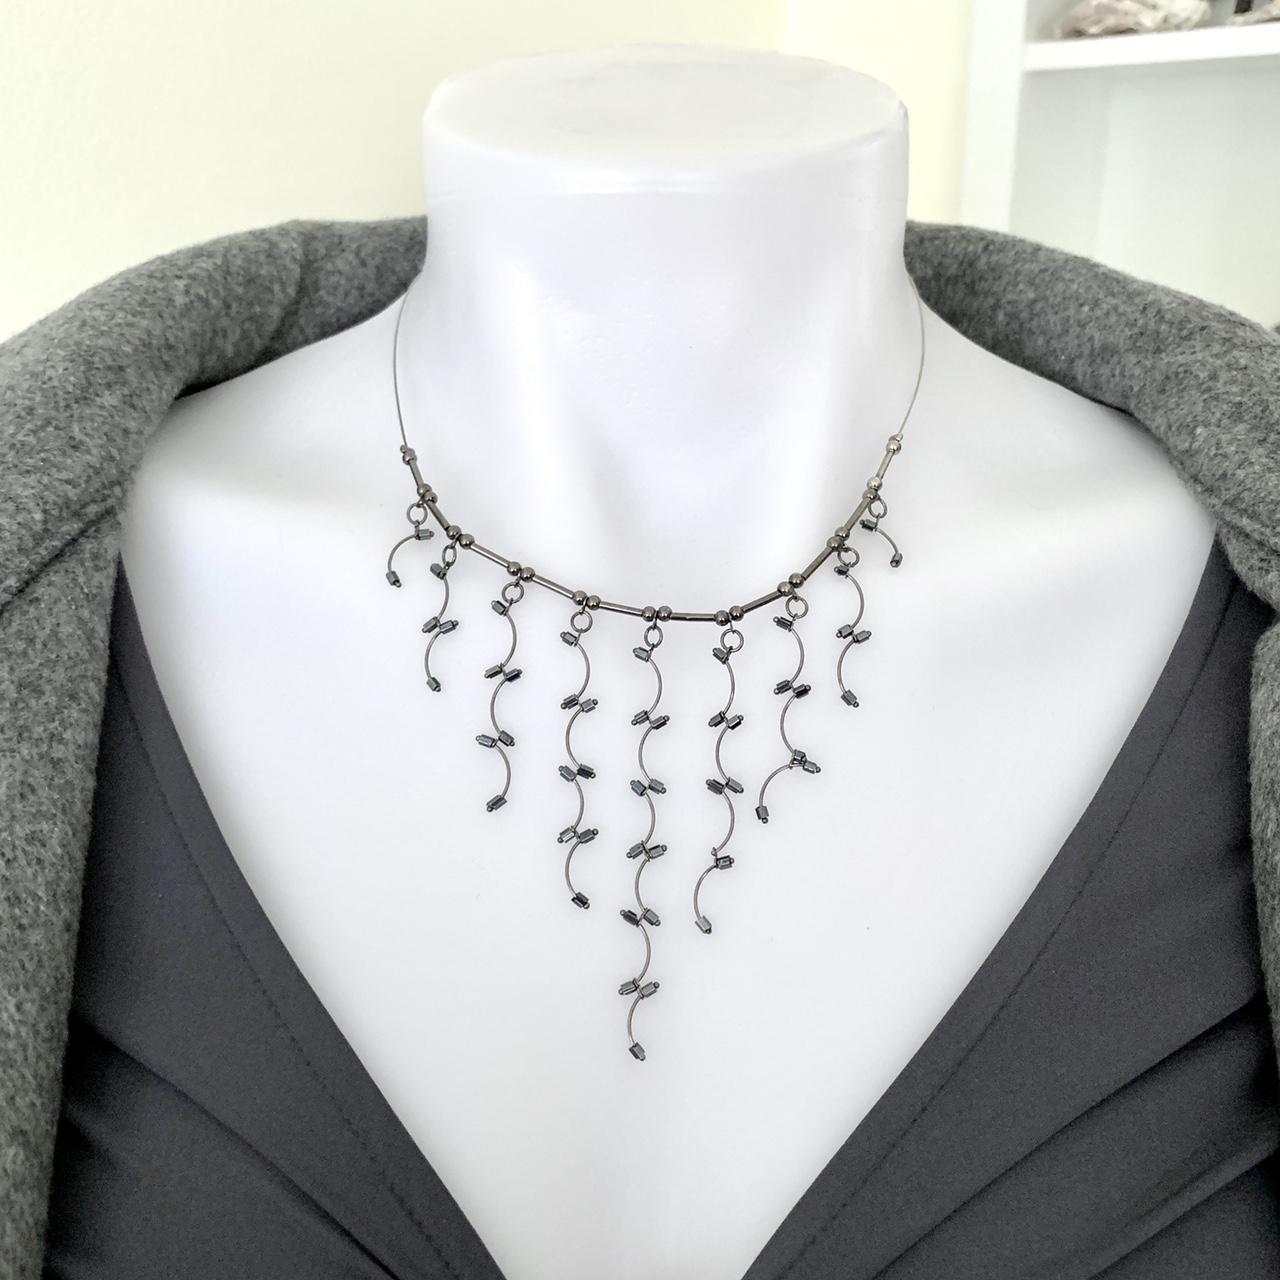 Product Image 2 - Metal wire bib choker necklace